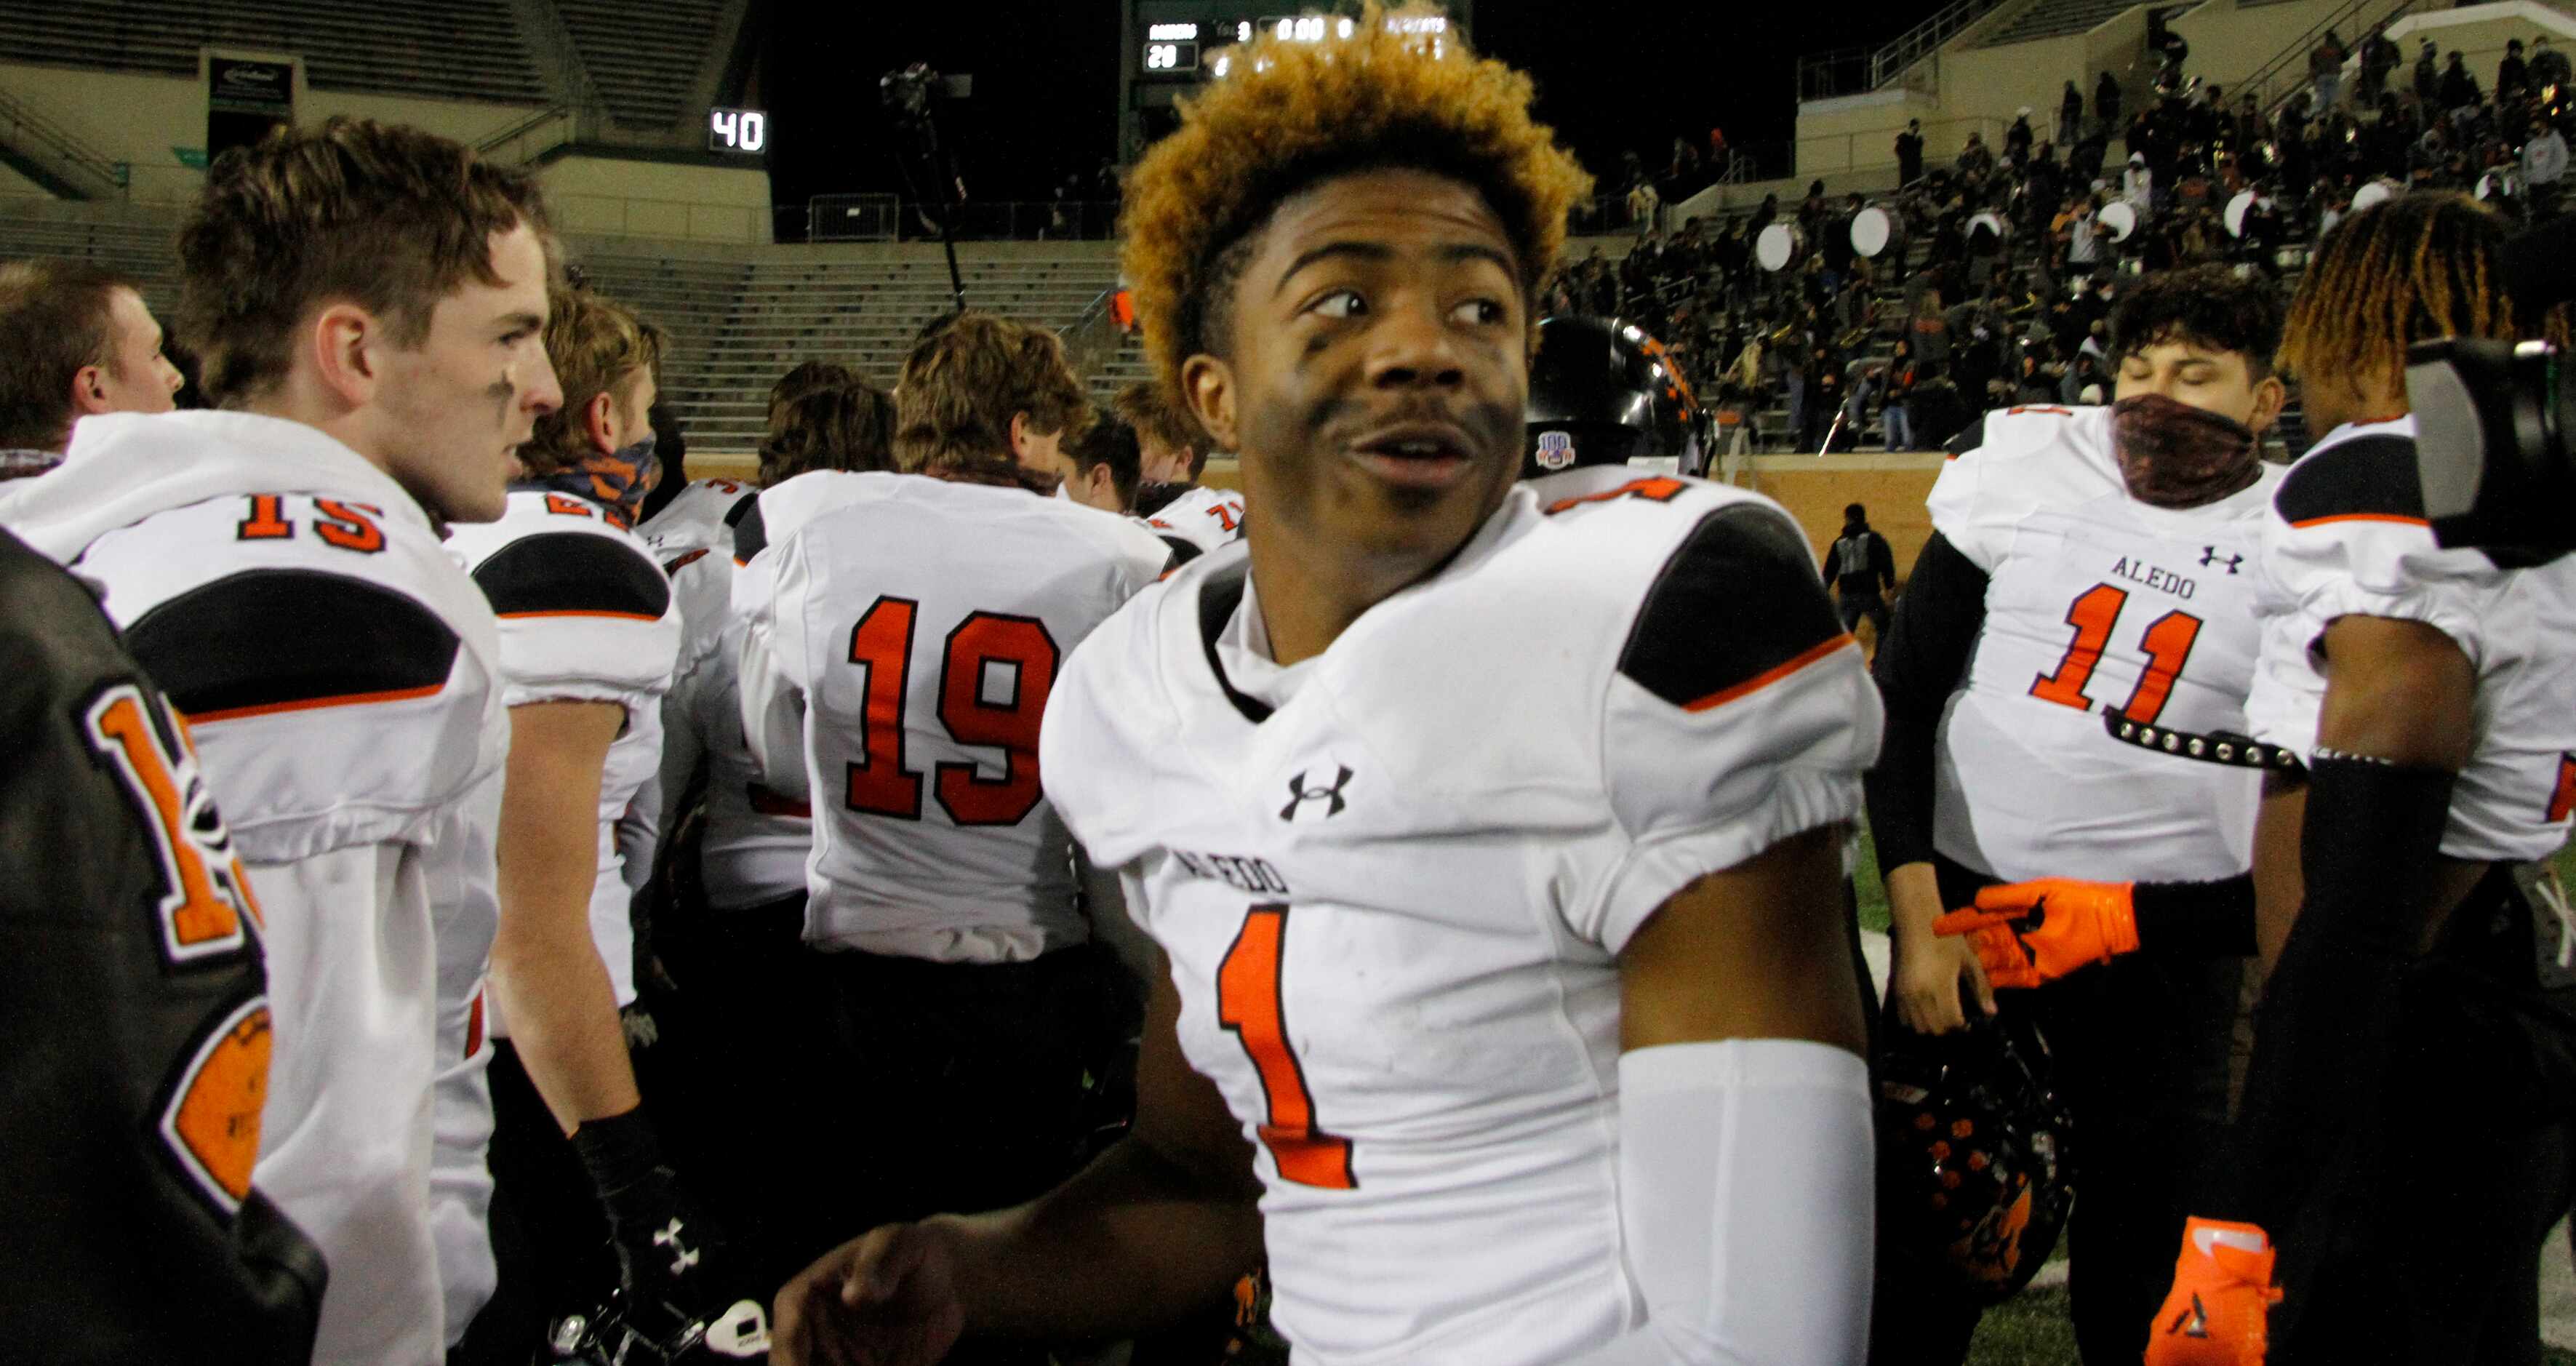 Aledo receiver JoJo Earle (1) turns to the sound of his name from fans in the stands after...